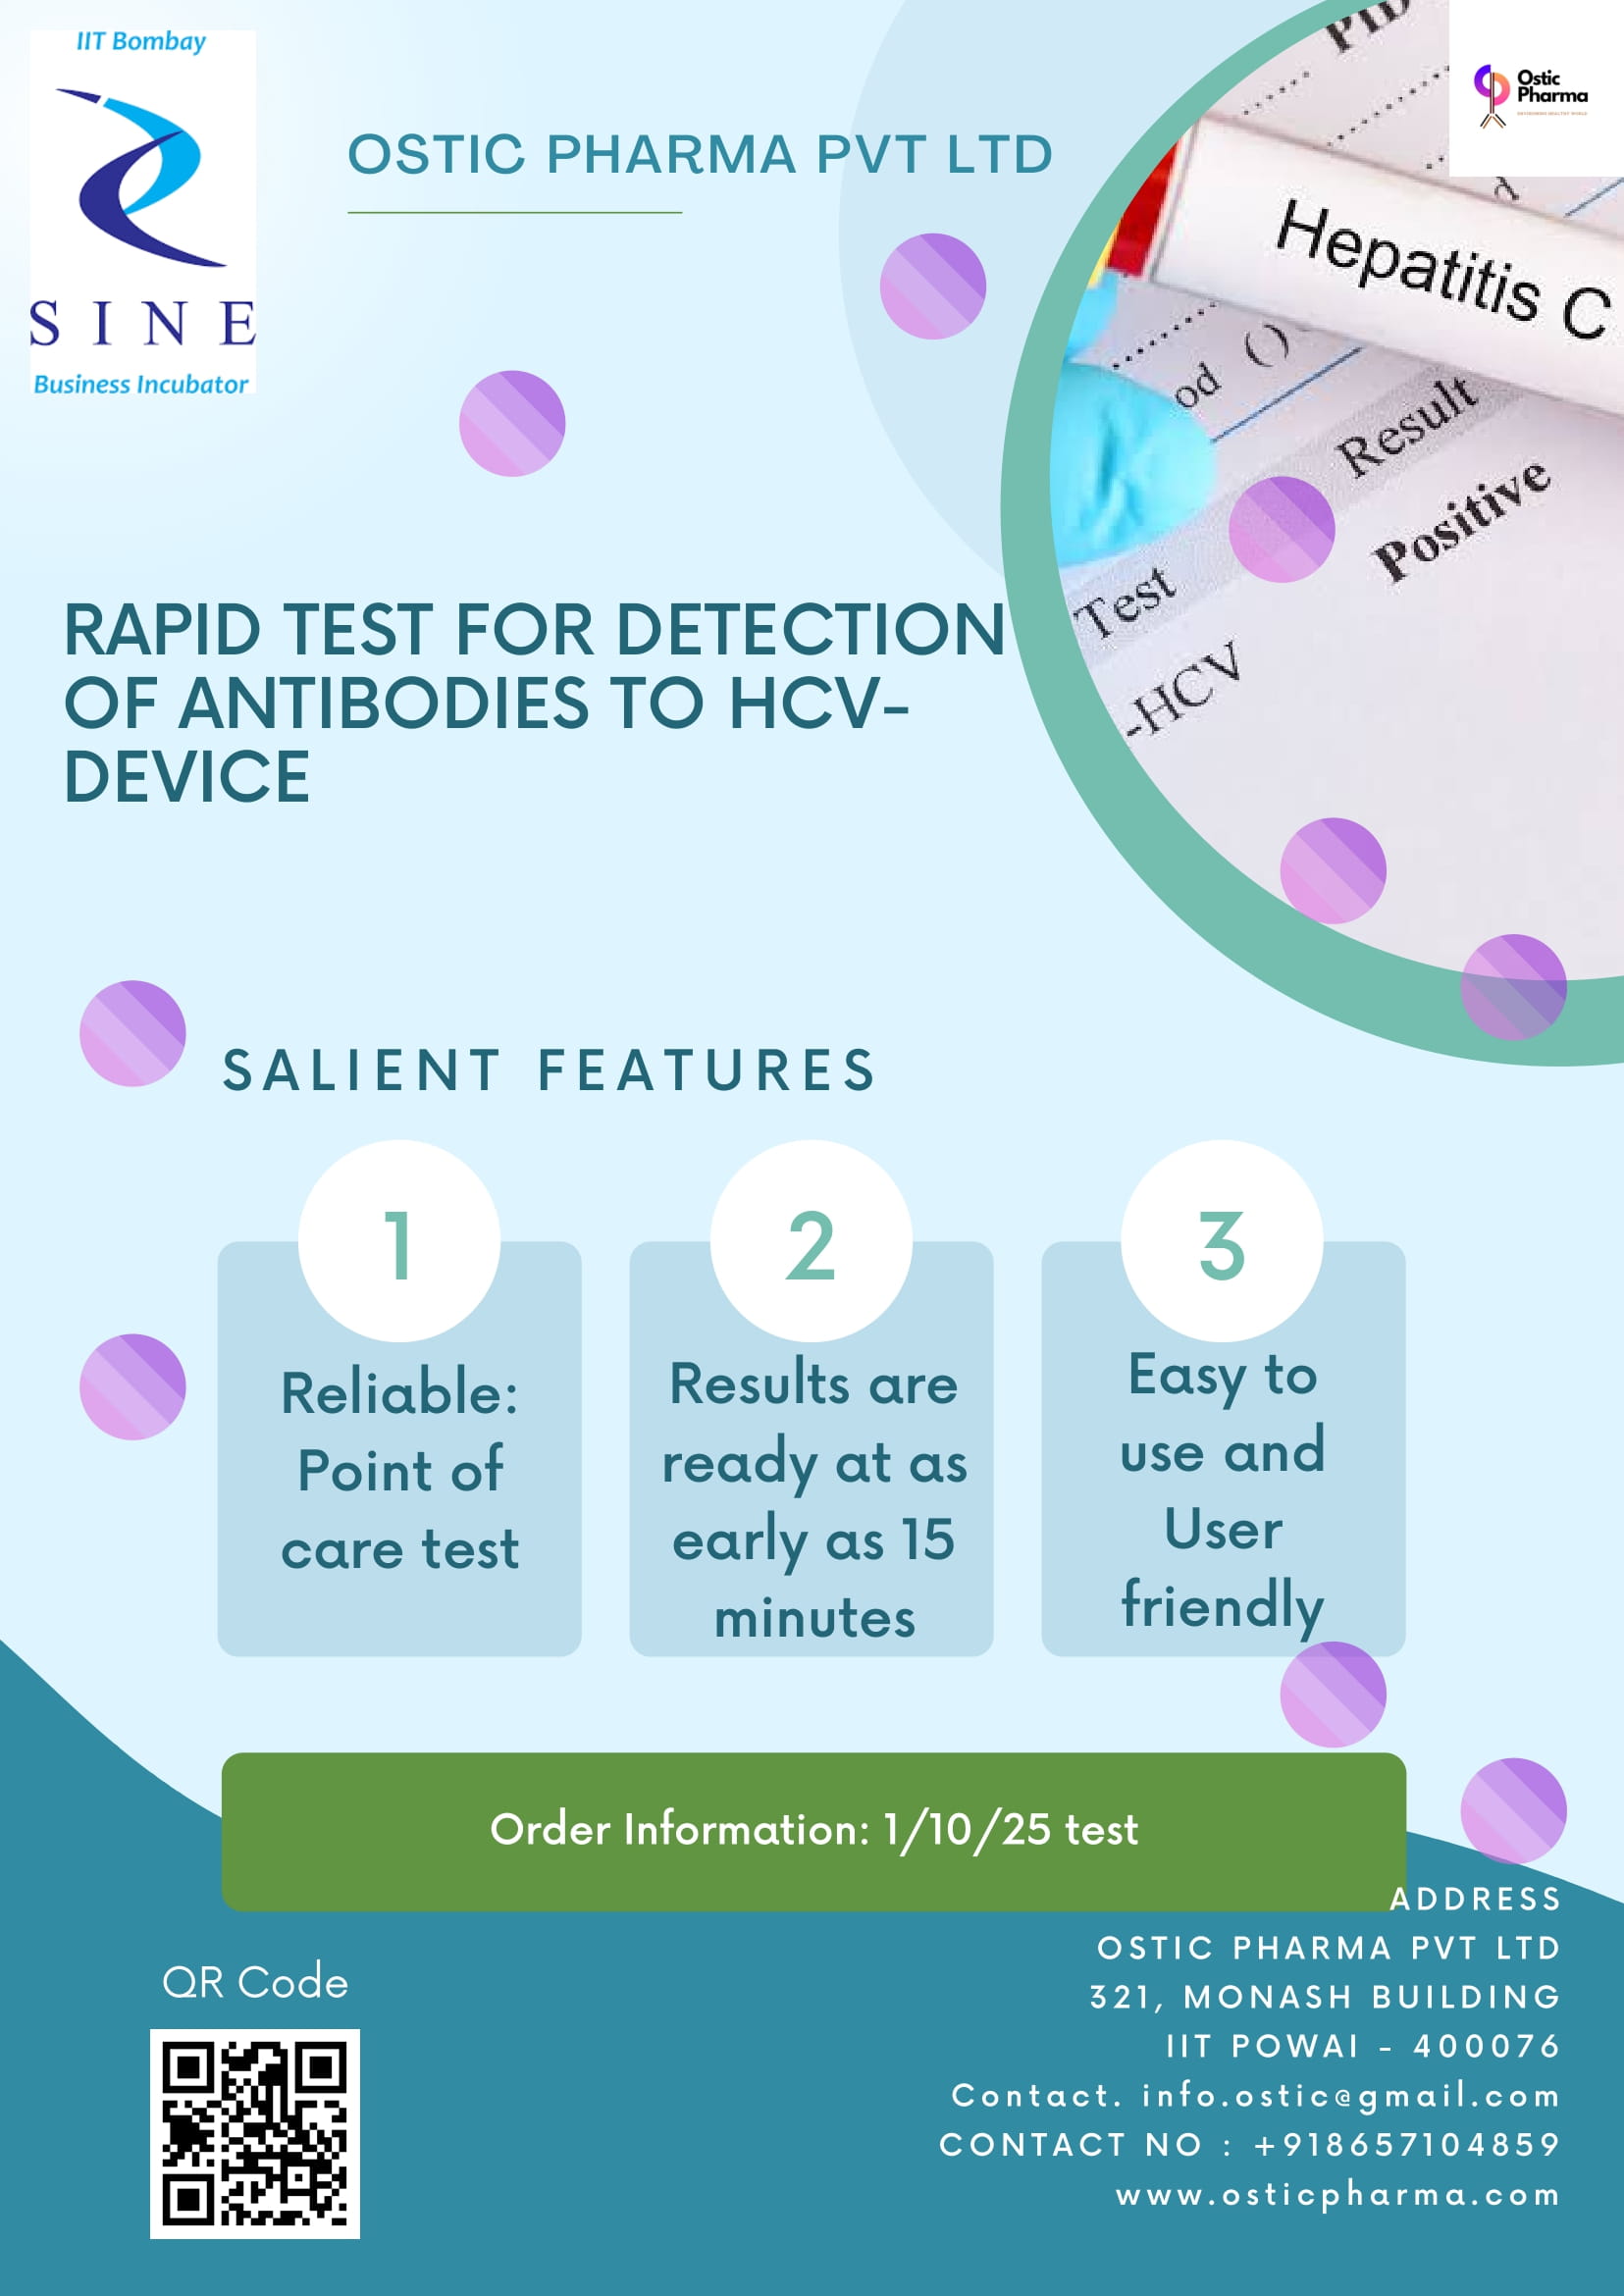 RAPID TEST FOR DETECTION OF ANTIBODIES TO HCV-DEVICE